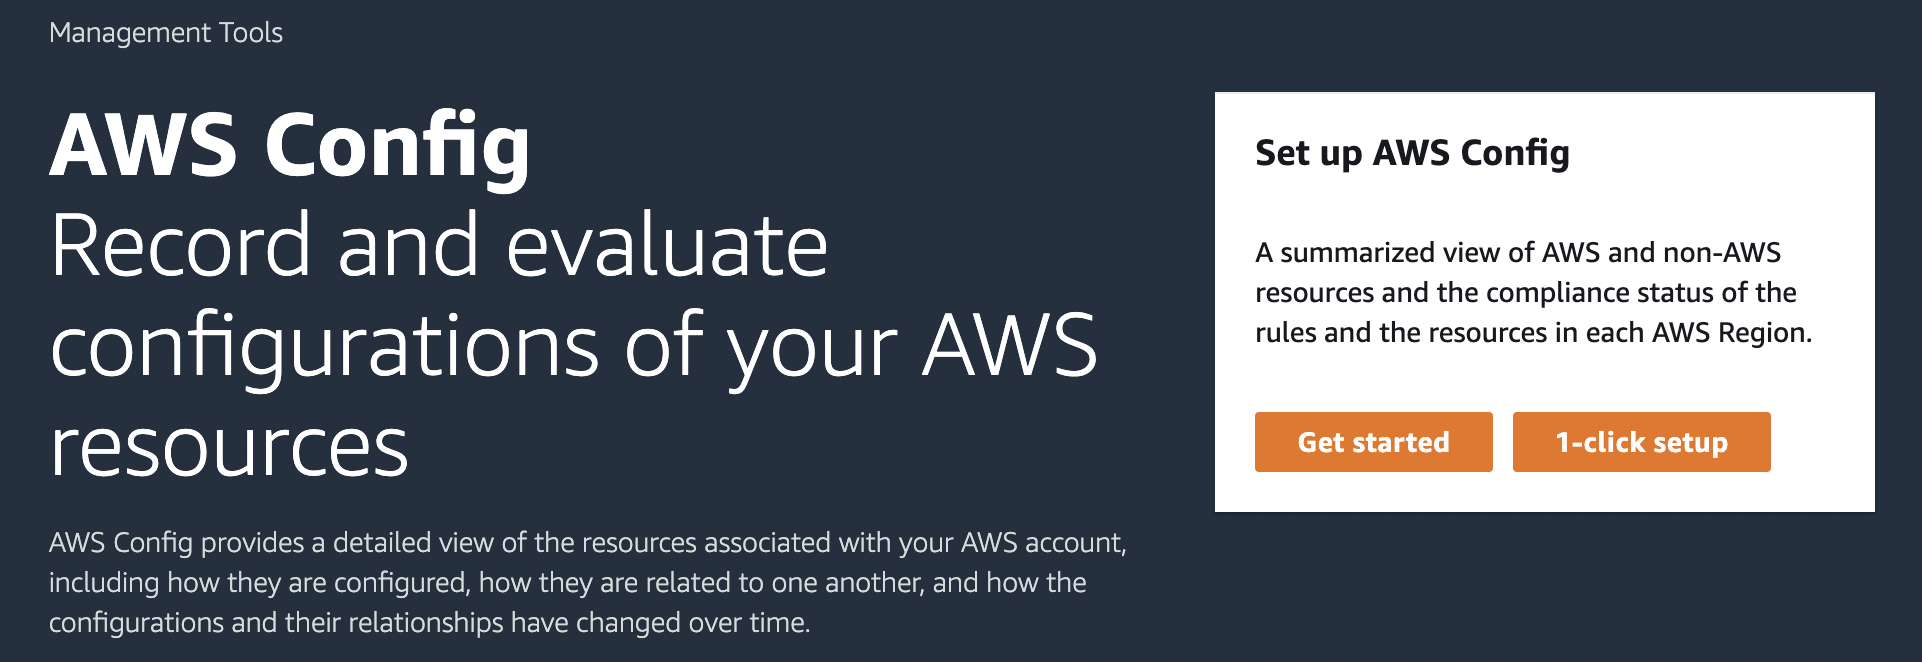                      The AWS Config getting started page provides an overview of the                         service.                 